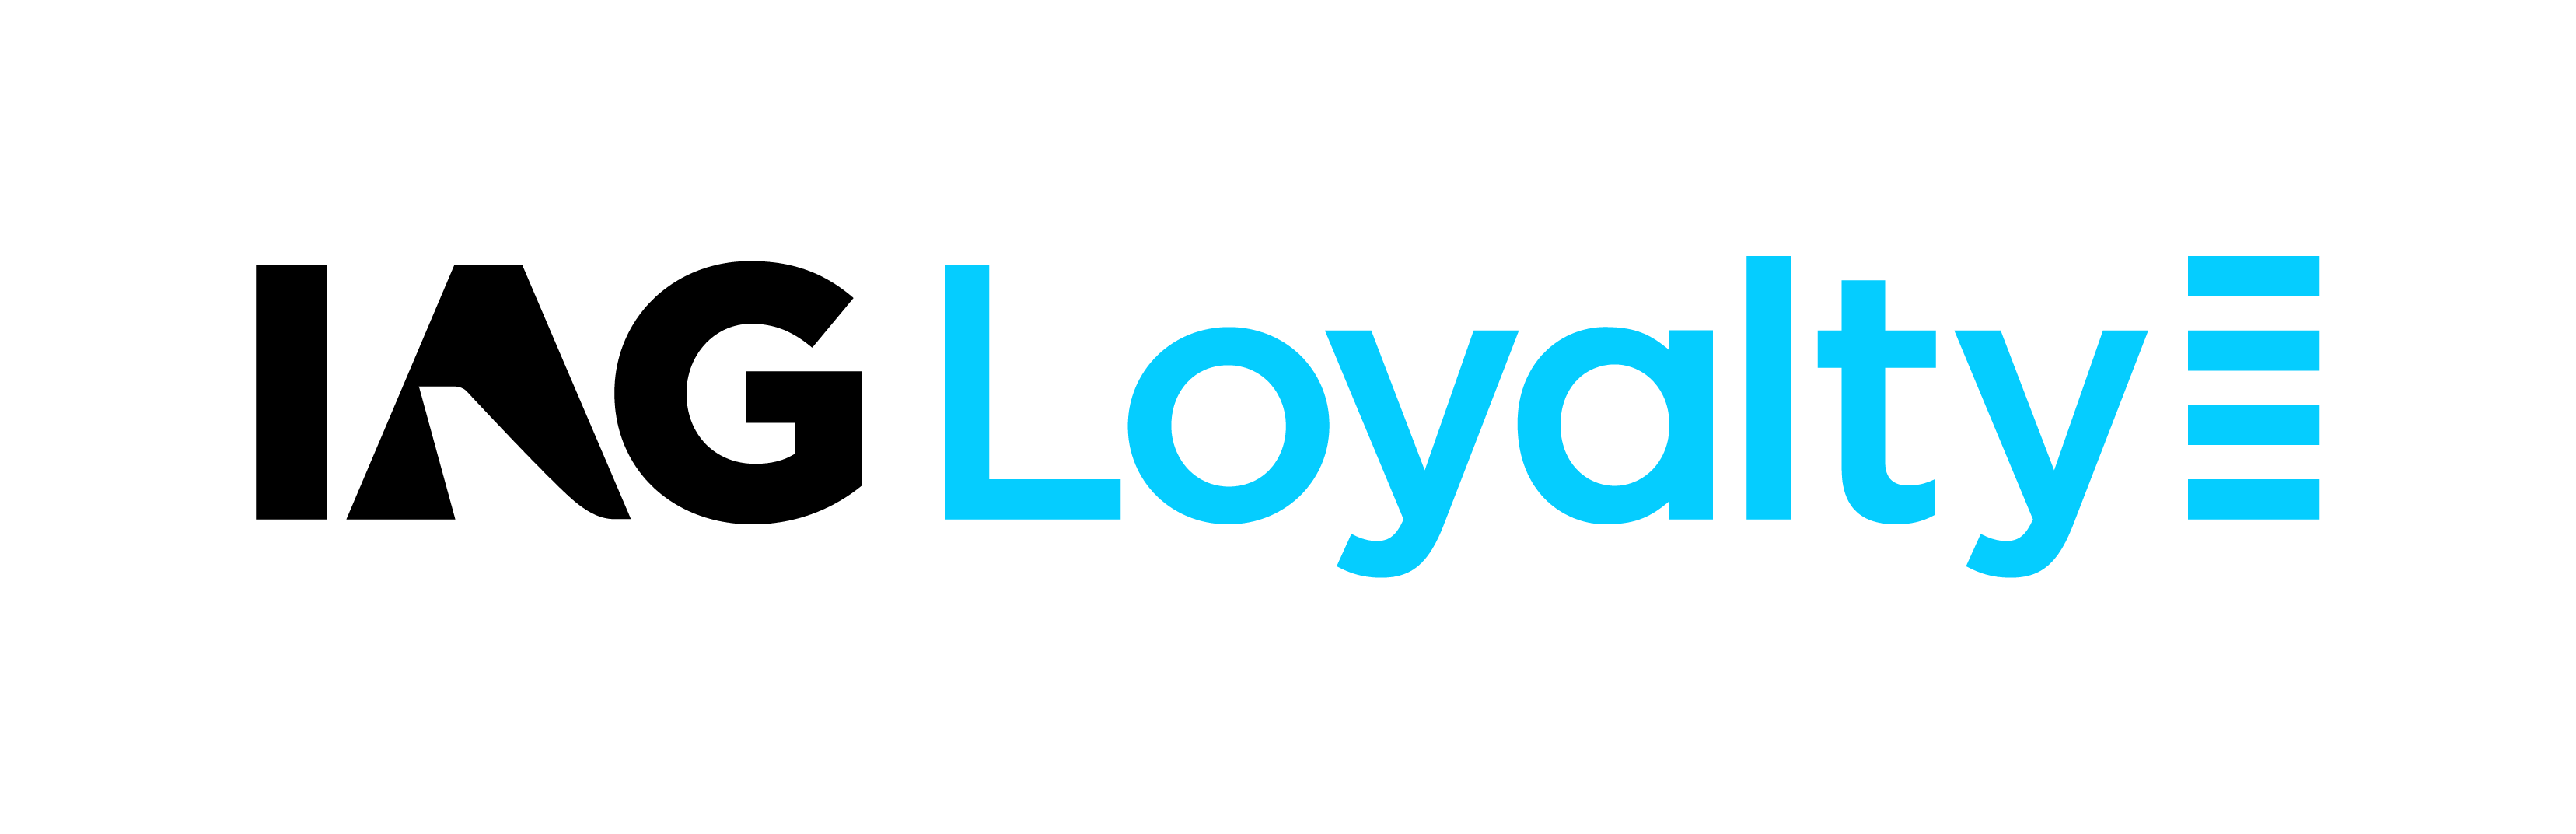 loyalty-logo-black-and-blue.png